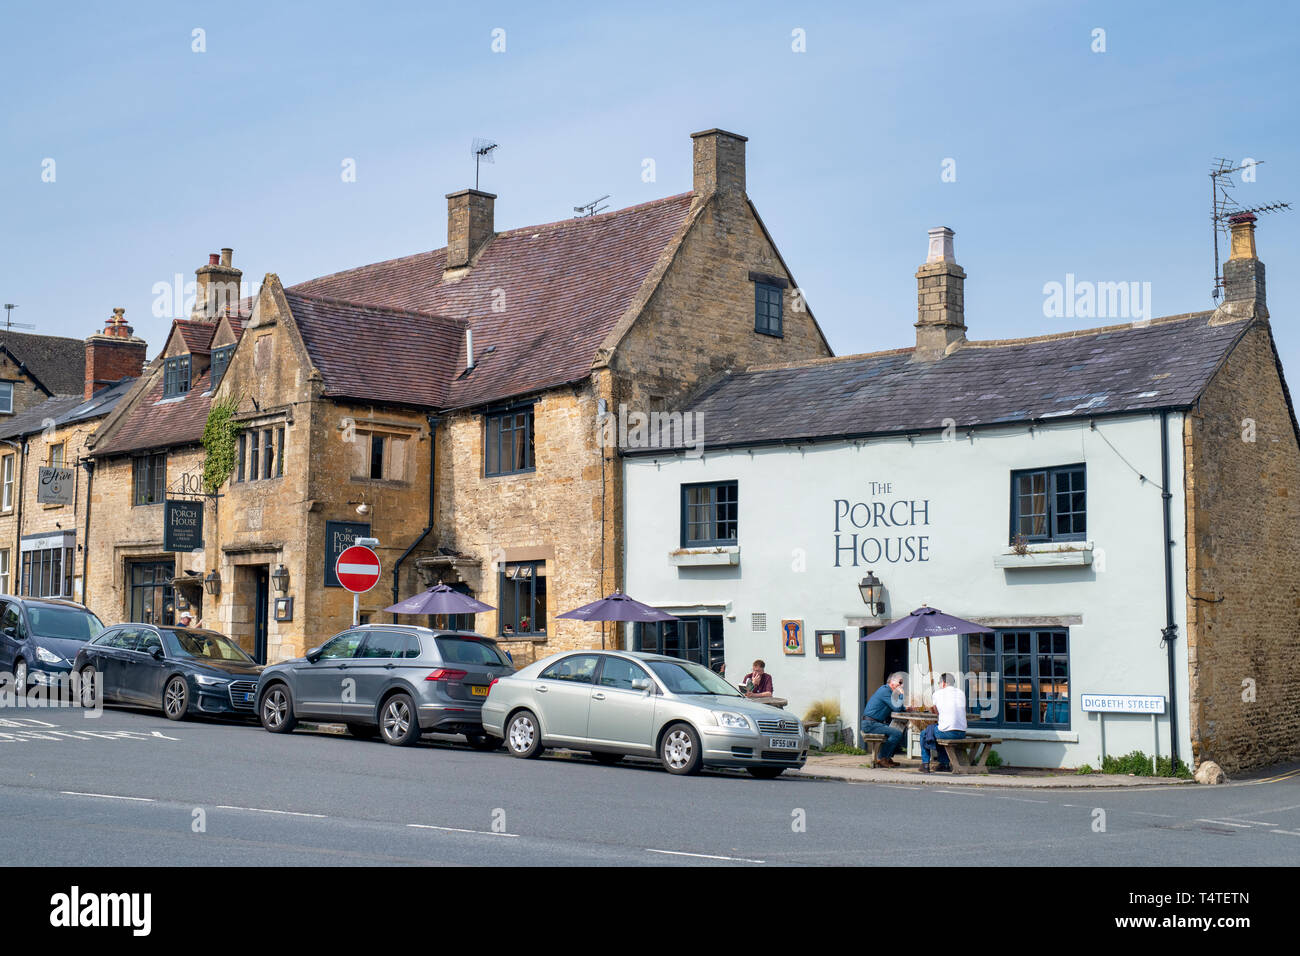 The Porch house Inn, Digbeth Street, Stow on the Wold, Gloucestershire, Cotswolds, England Stock Photo